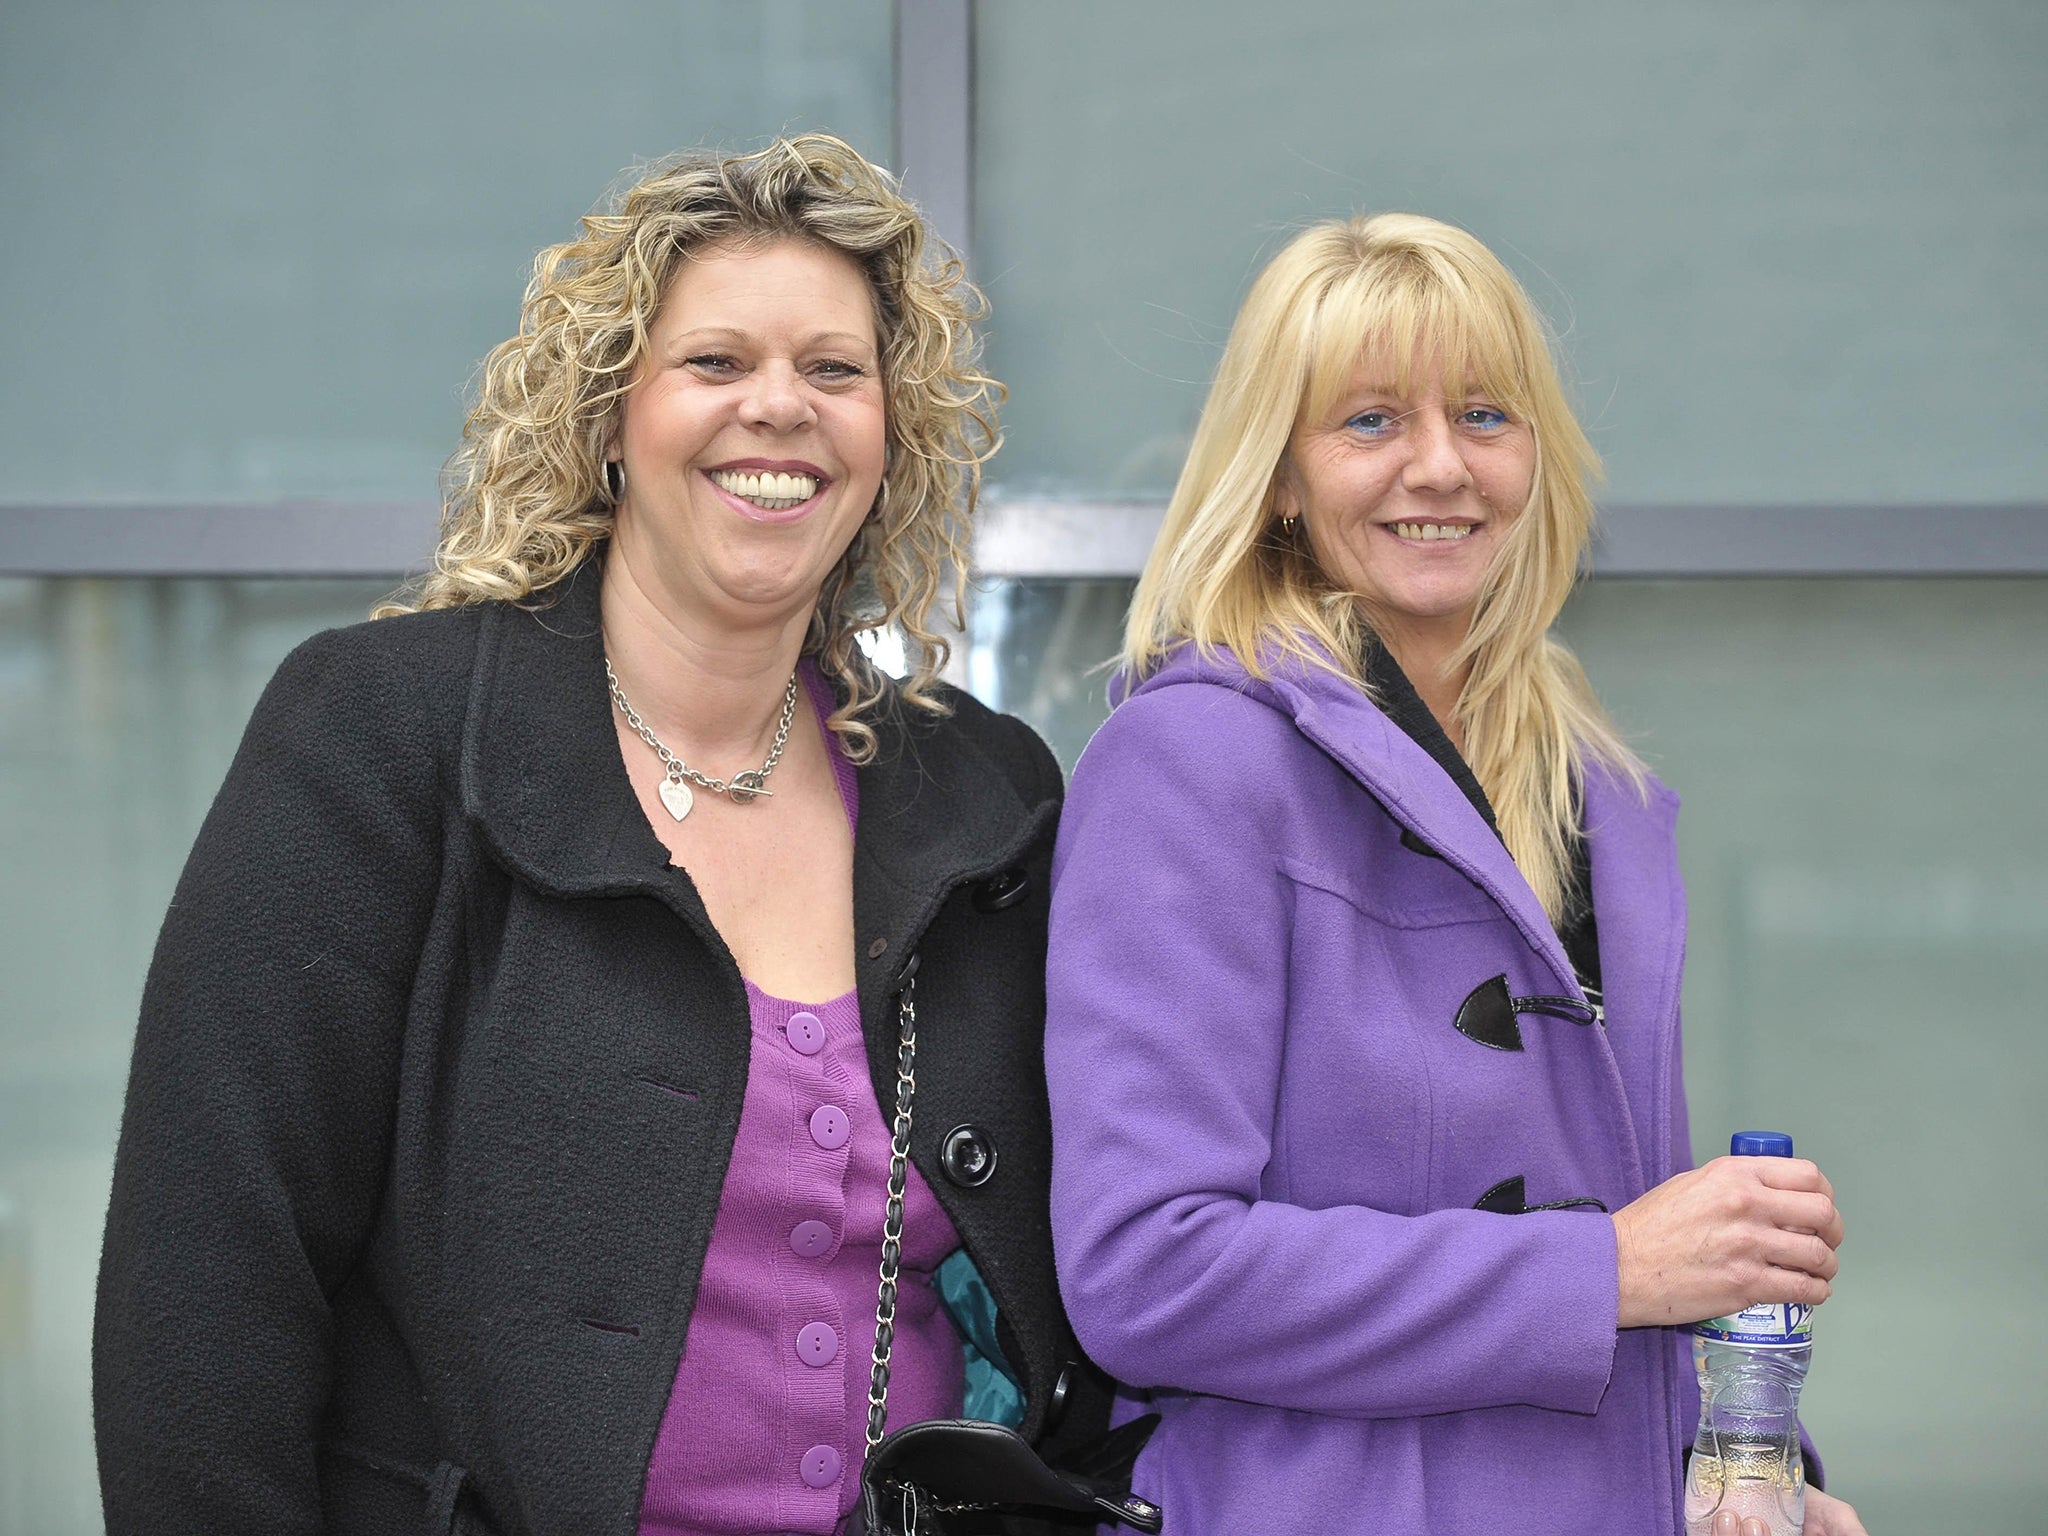 Rita Lomas (left) and Jane Smith were given suspended sentences for their role